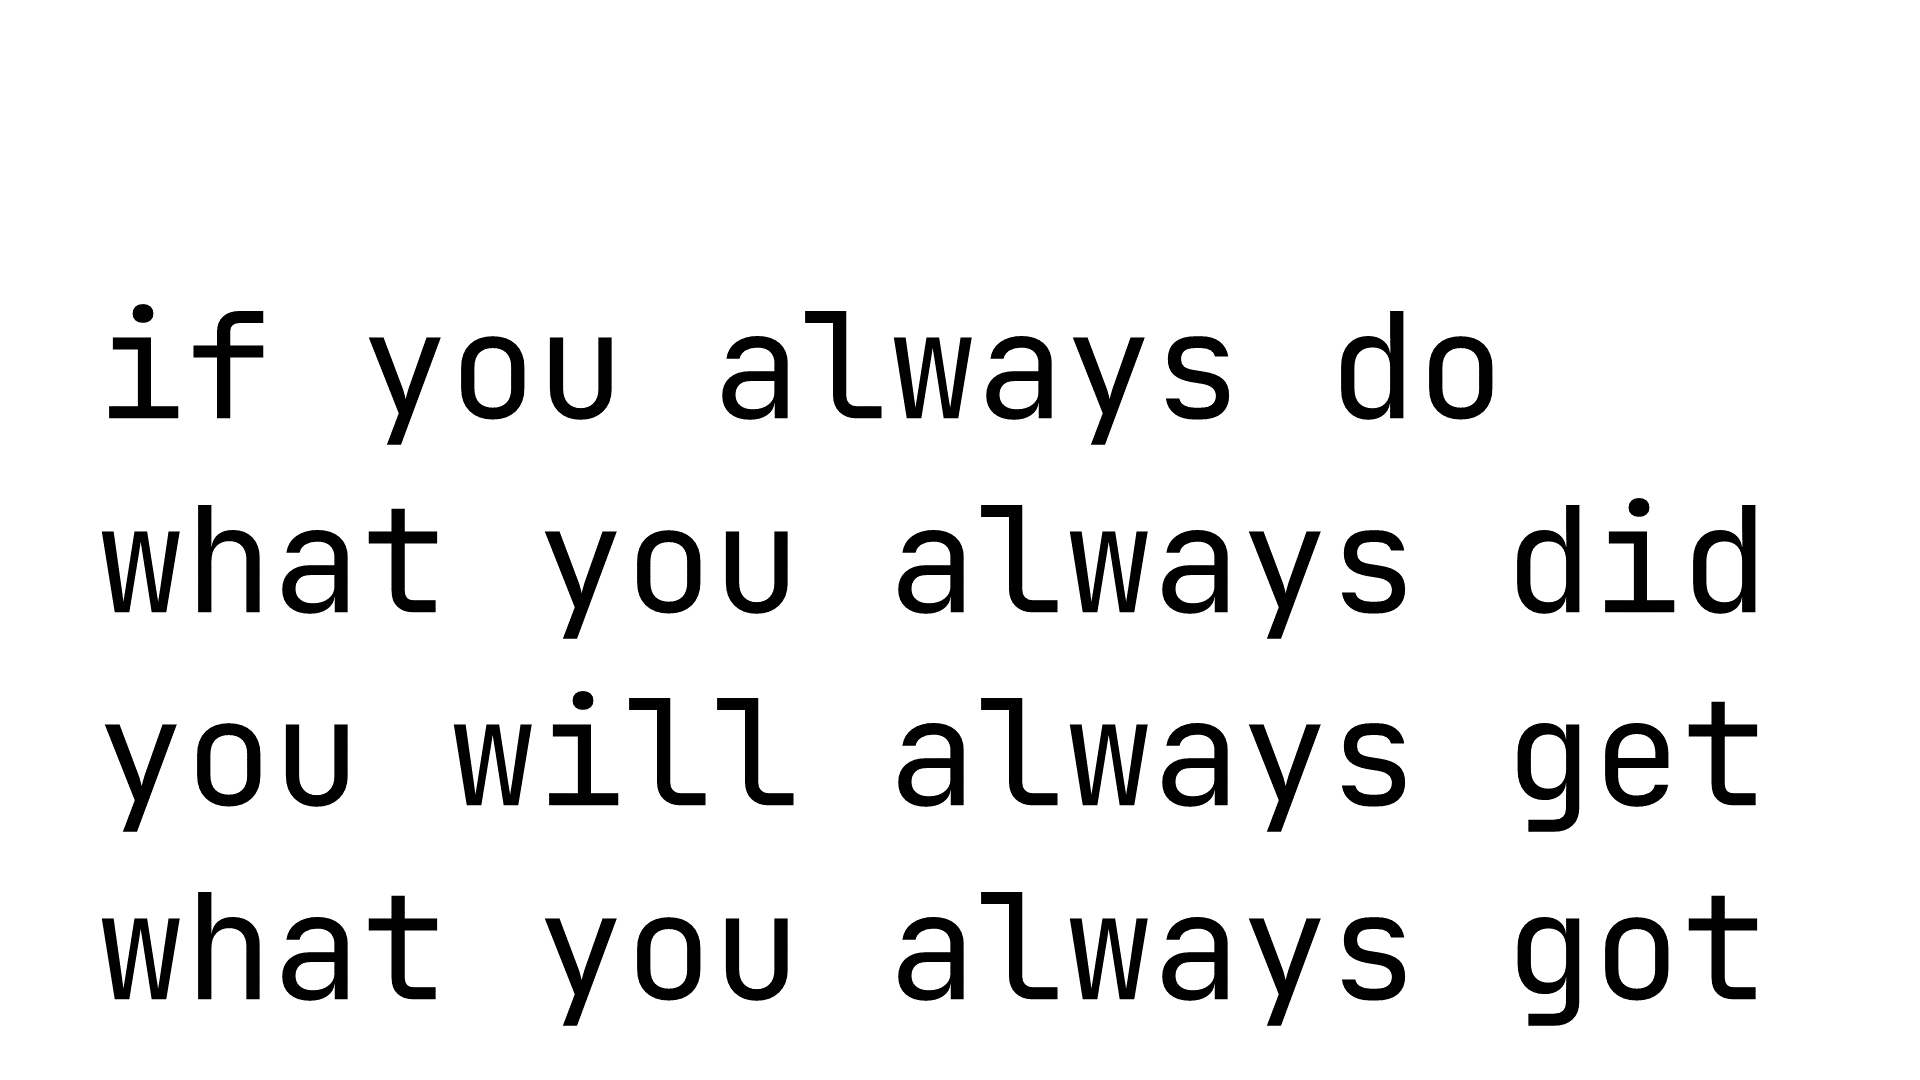 The image displays the following phrase: if you always do what you always did you will always get what you always got.